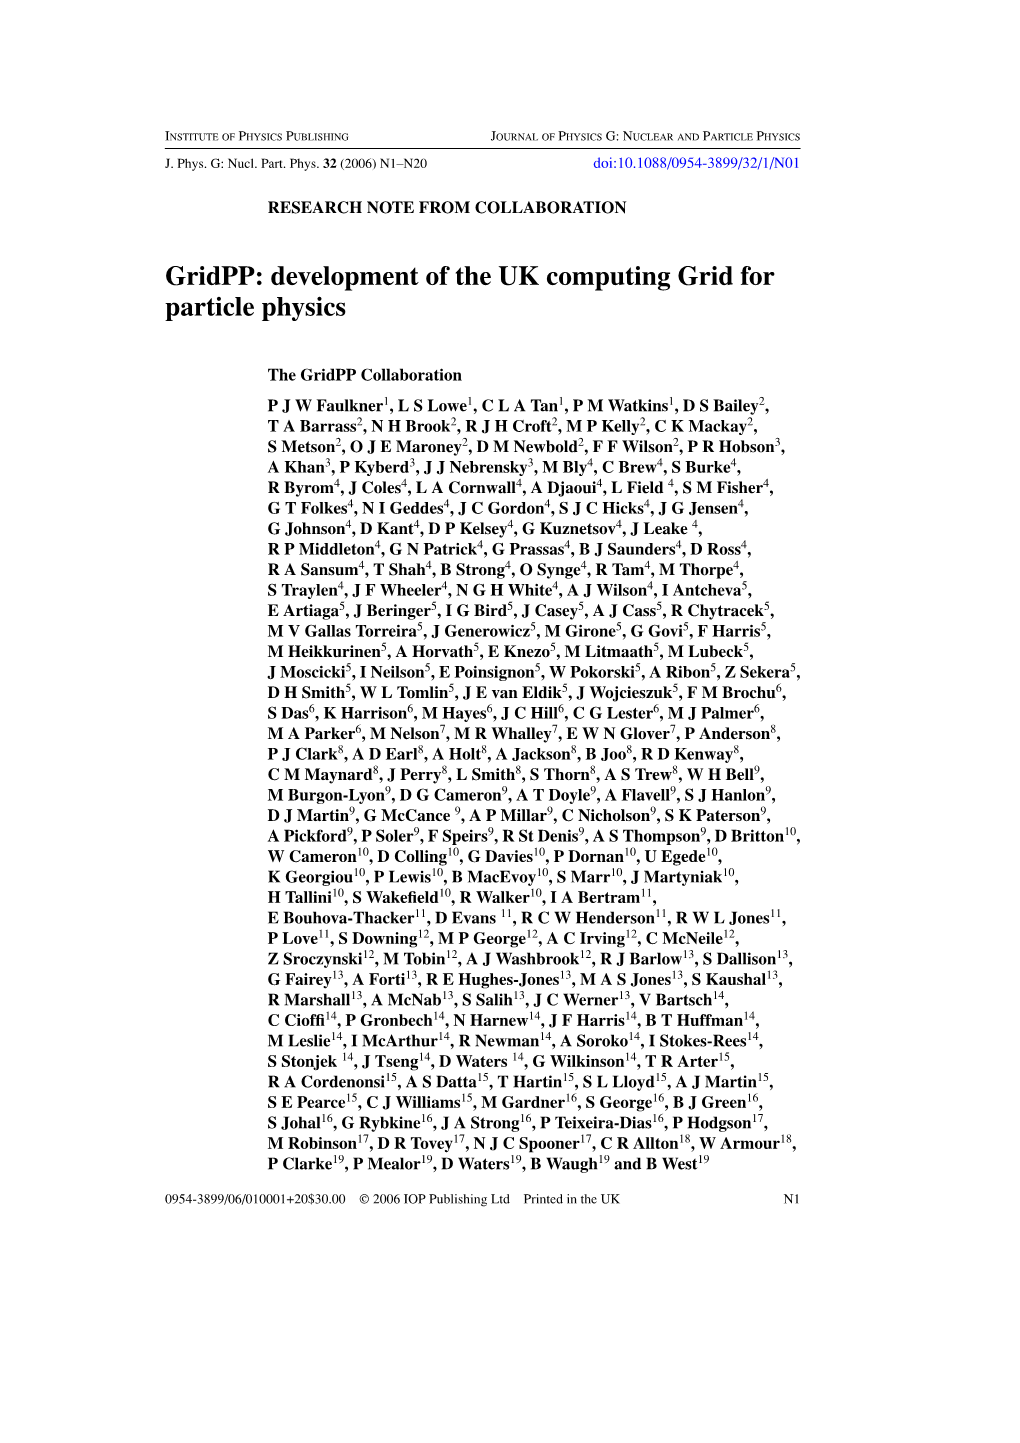 Gridpp: Development of the UK Computing Grid for Particle Physics